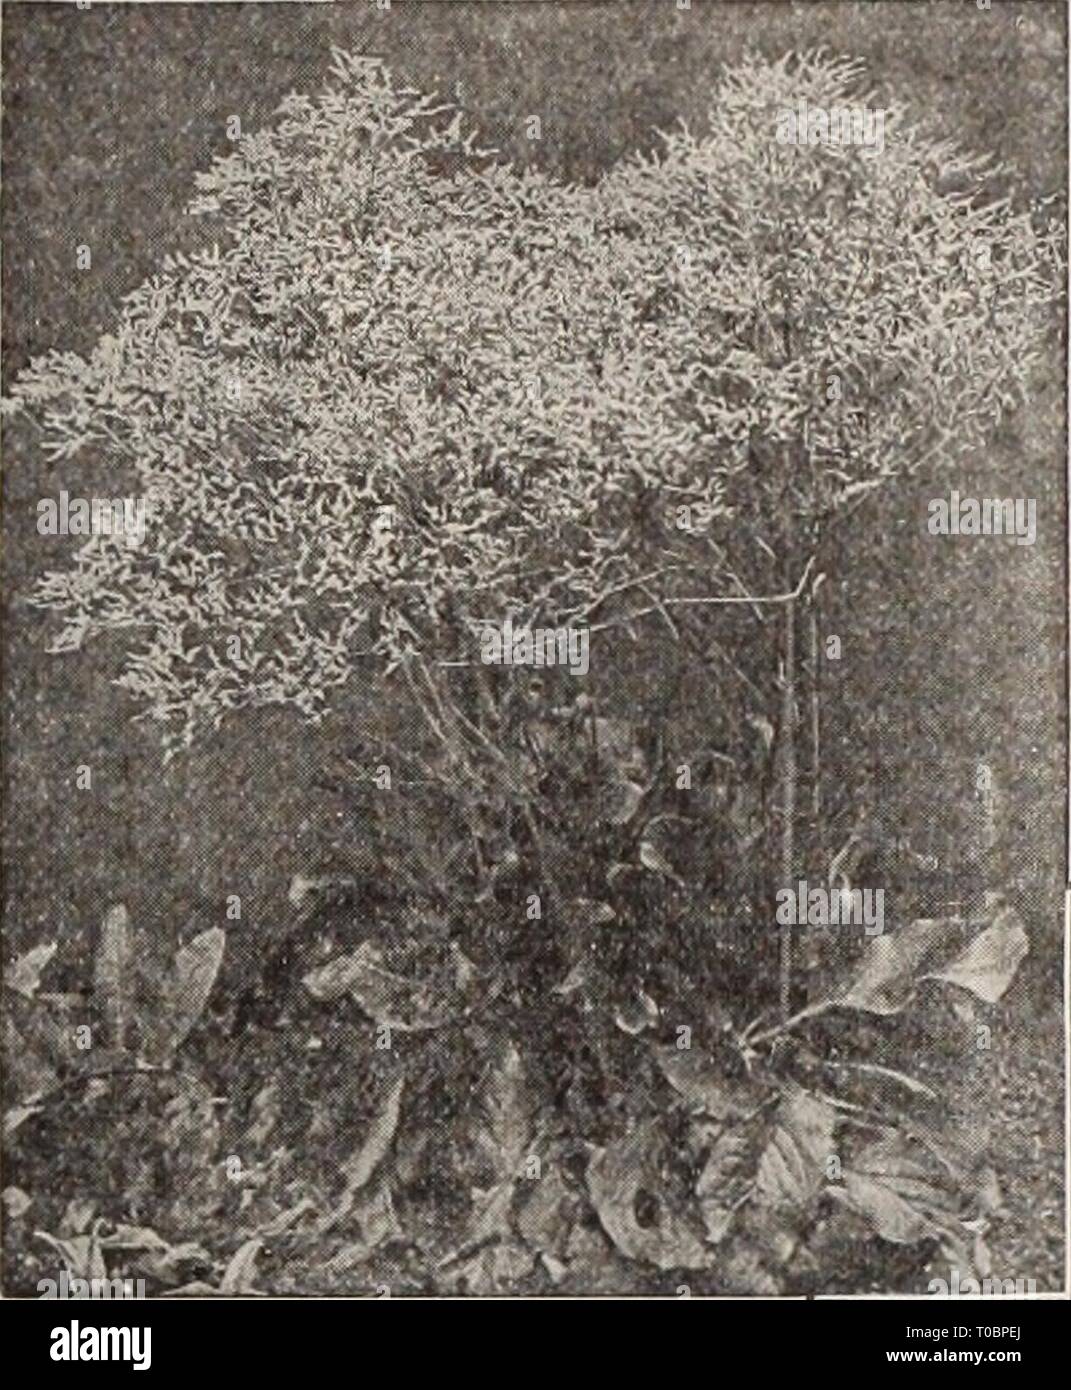 Dreer's garden book  Henry Dreer's garden book / Henry A. Dreer. dreersgardenbook1931dree Year:   Sedum Spectabile Sedum or Stone-Crop, Dwarf Sorts Silene (Catchfiy) Alpestris. A good rock plant, grows 4 inches high with white flowers in July and August. Maritima. Compact masses of glaucous blue foliage, covered with pinkish-white flowers from June to August. Very desirable for hot, dry spots in the rockery, or for rock walls; 2 to 3 inches. Schafta (Autumn Catchfly). A charming border or rock plant from 4 to 6 inches high, with bright pink flowers from July to October. 25 cts. each; $2.50 per Stock Photo